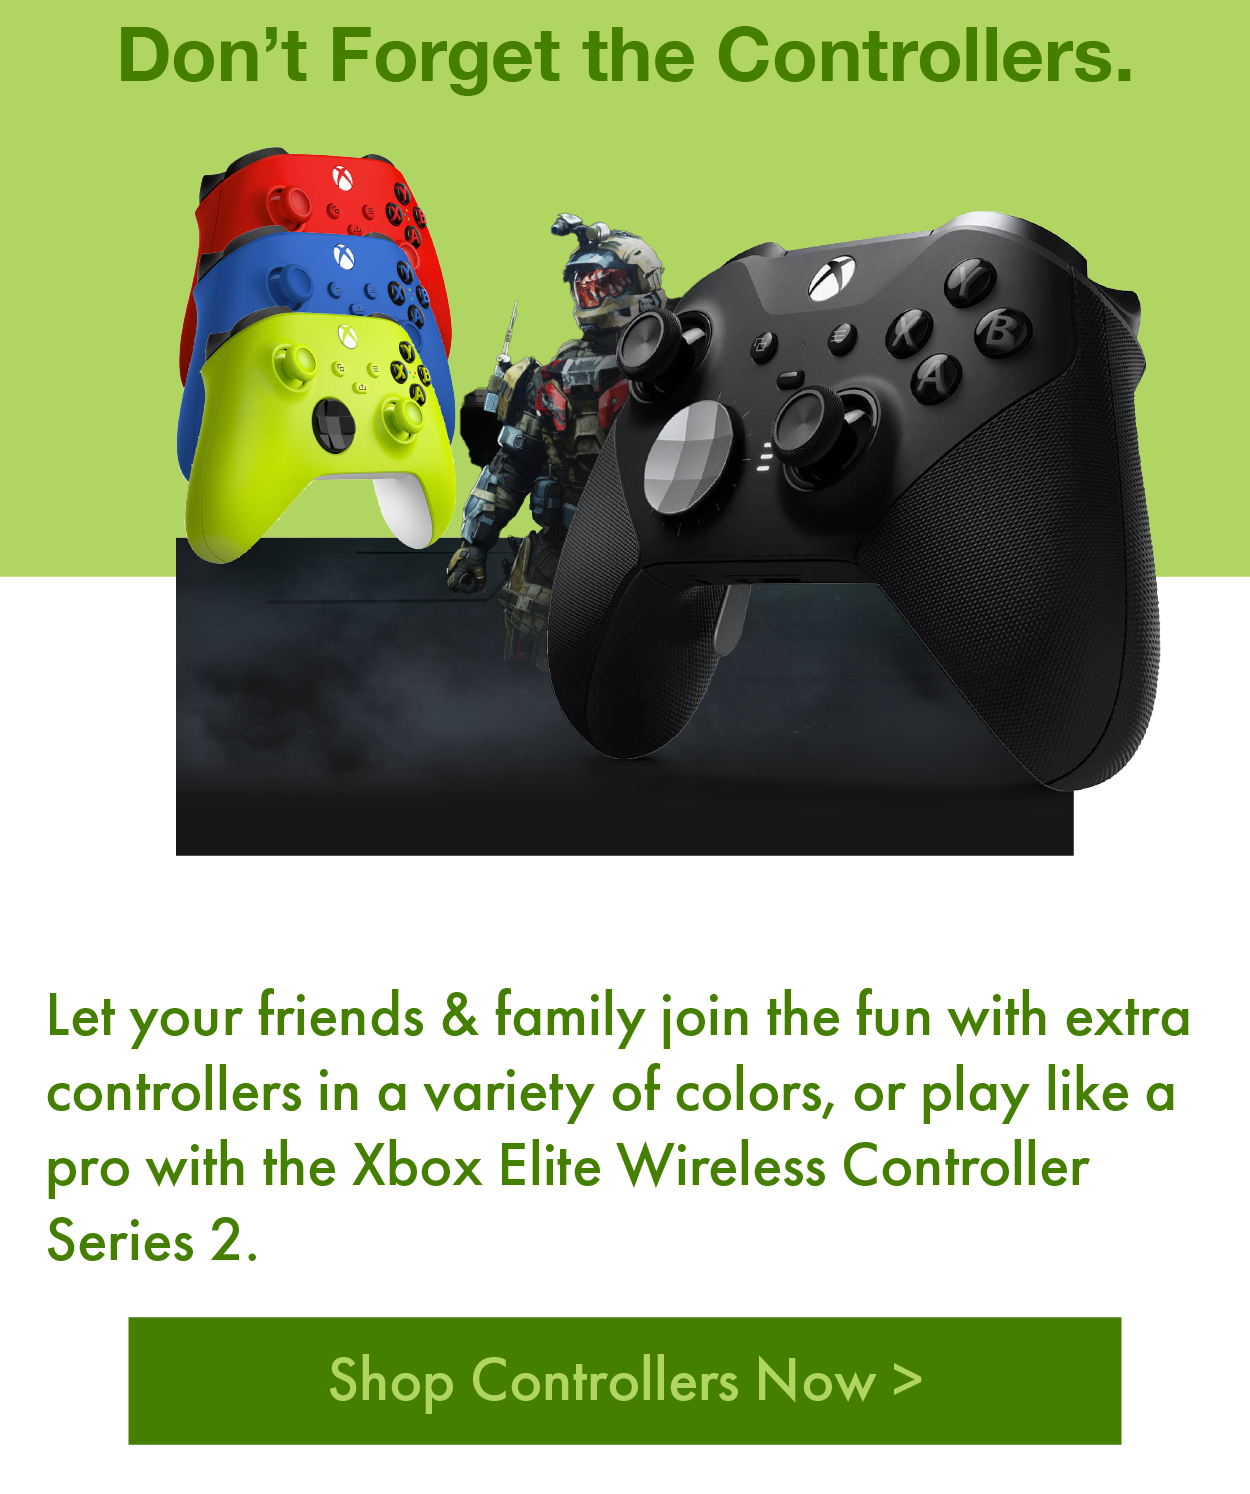 Don’t Forget the Controllers. Let your friends & family join the fun with extra controllers in a variety of colors, or play like a pro with the Xbox Elite Wireless Controller Series 2.